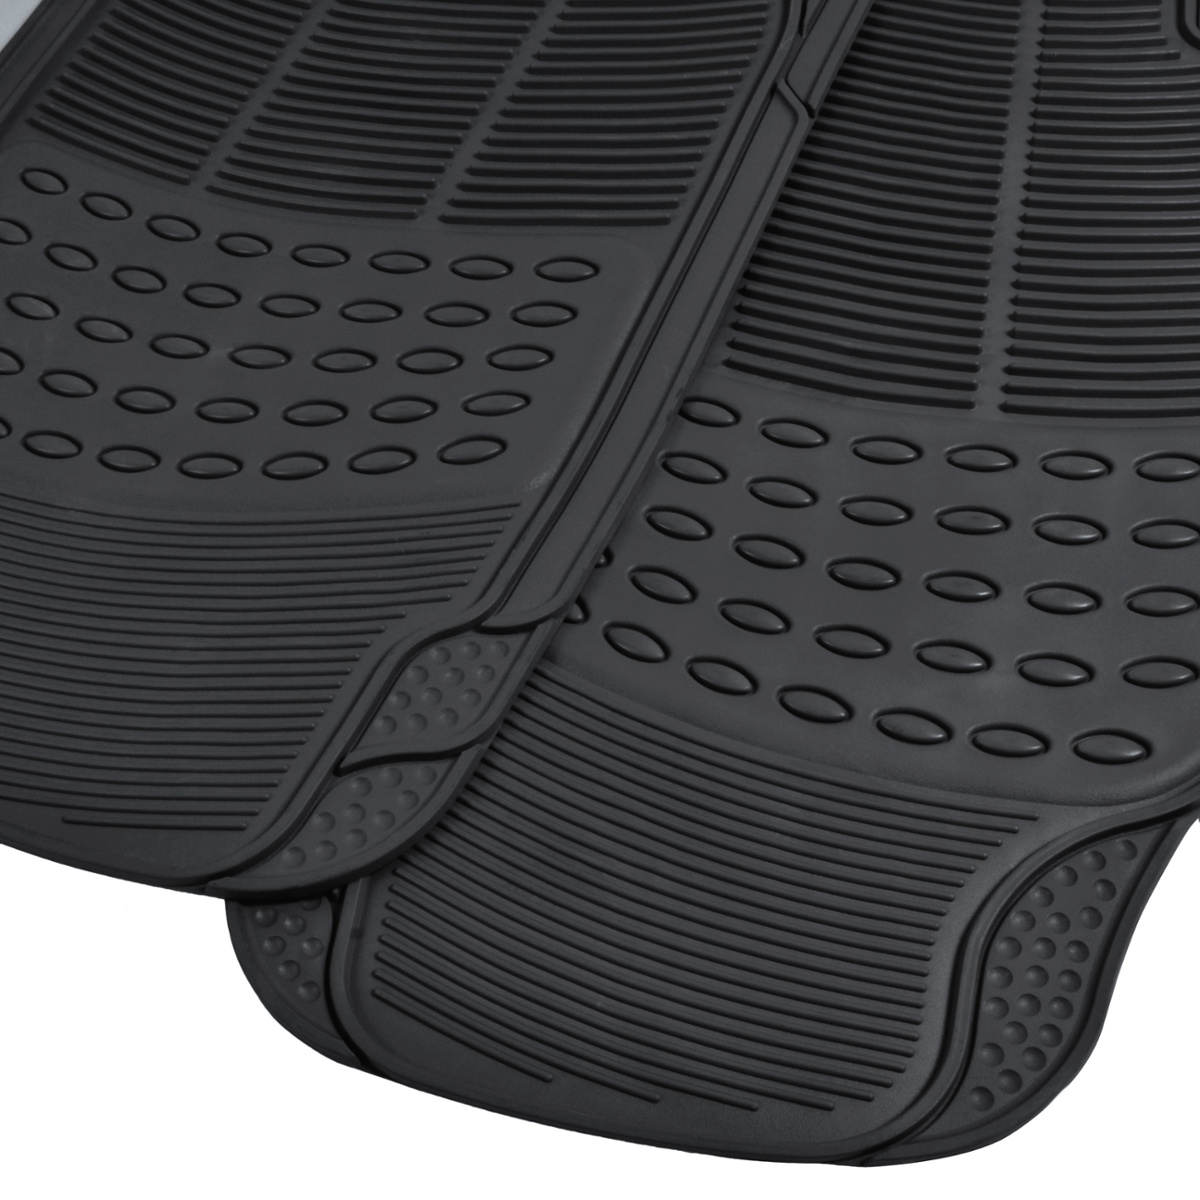 BDK Front and Back ProLiner Heavy Duty Car Rubber Floor Mats for Auto, 3 Piece Set - image 3 of 11